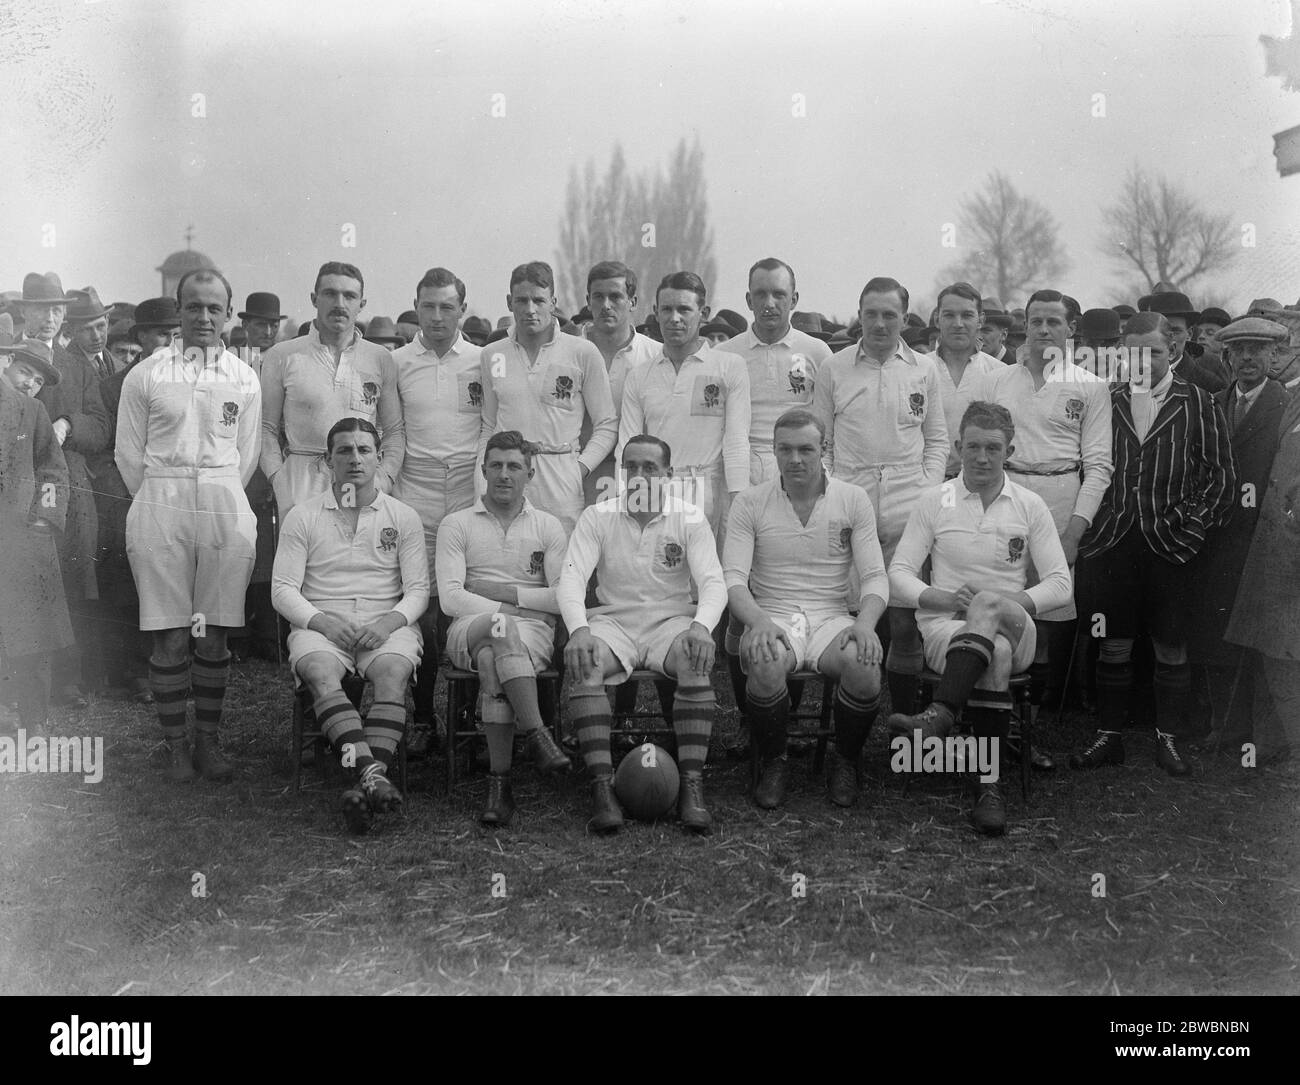 Rugby Match of the Season in the 1922 Five Nations Championship England versuse Scotland at Twickenham , London The English team Unknown order John Middleton , Cyril Lowe , Edward Myers , Alastair Smallwood , James Pitman , Dave Davies (c) , Cecil Kershaw , Geoffrey Conway , Peveril William-Powlett , Robert Duncan , Ron Cove-Smith , John Maxwell-Hyslop , Tom Voyce , Wavell Wakefield and Leo Price , England Test debuts JA Middleton, IJ Pitman, PBR William-Powlett 18 March 1922 Stock Photo